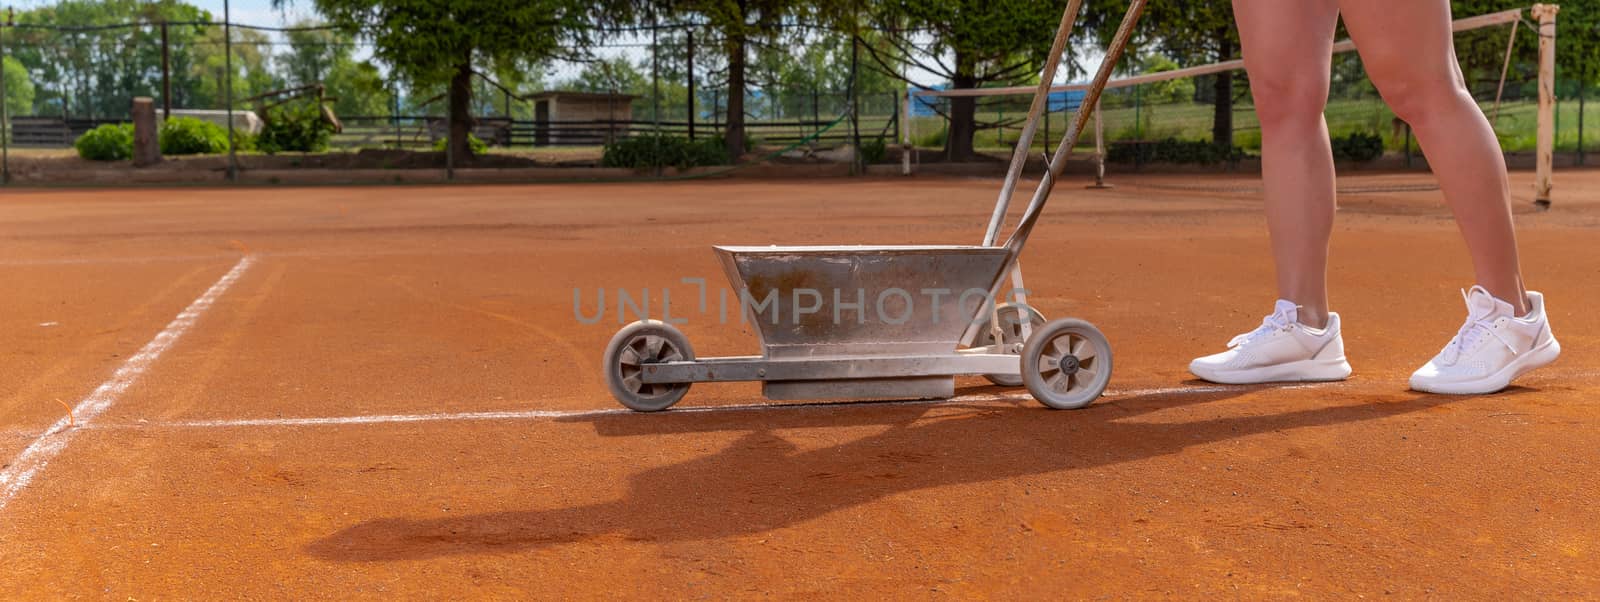 maintenance and repair of tennis courts. drawing white lines with lime by Edophoto